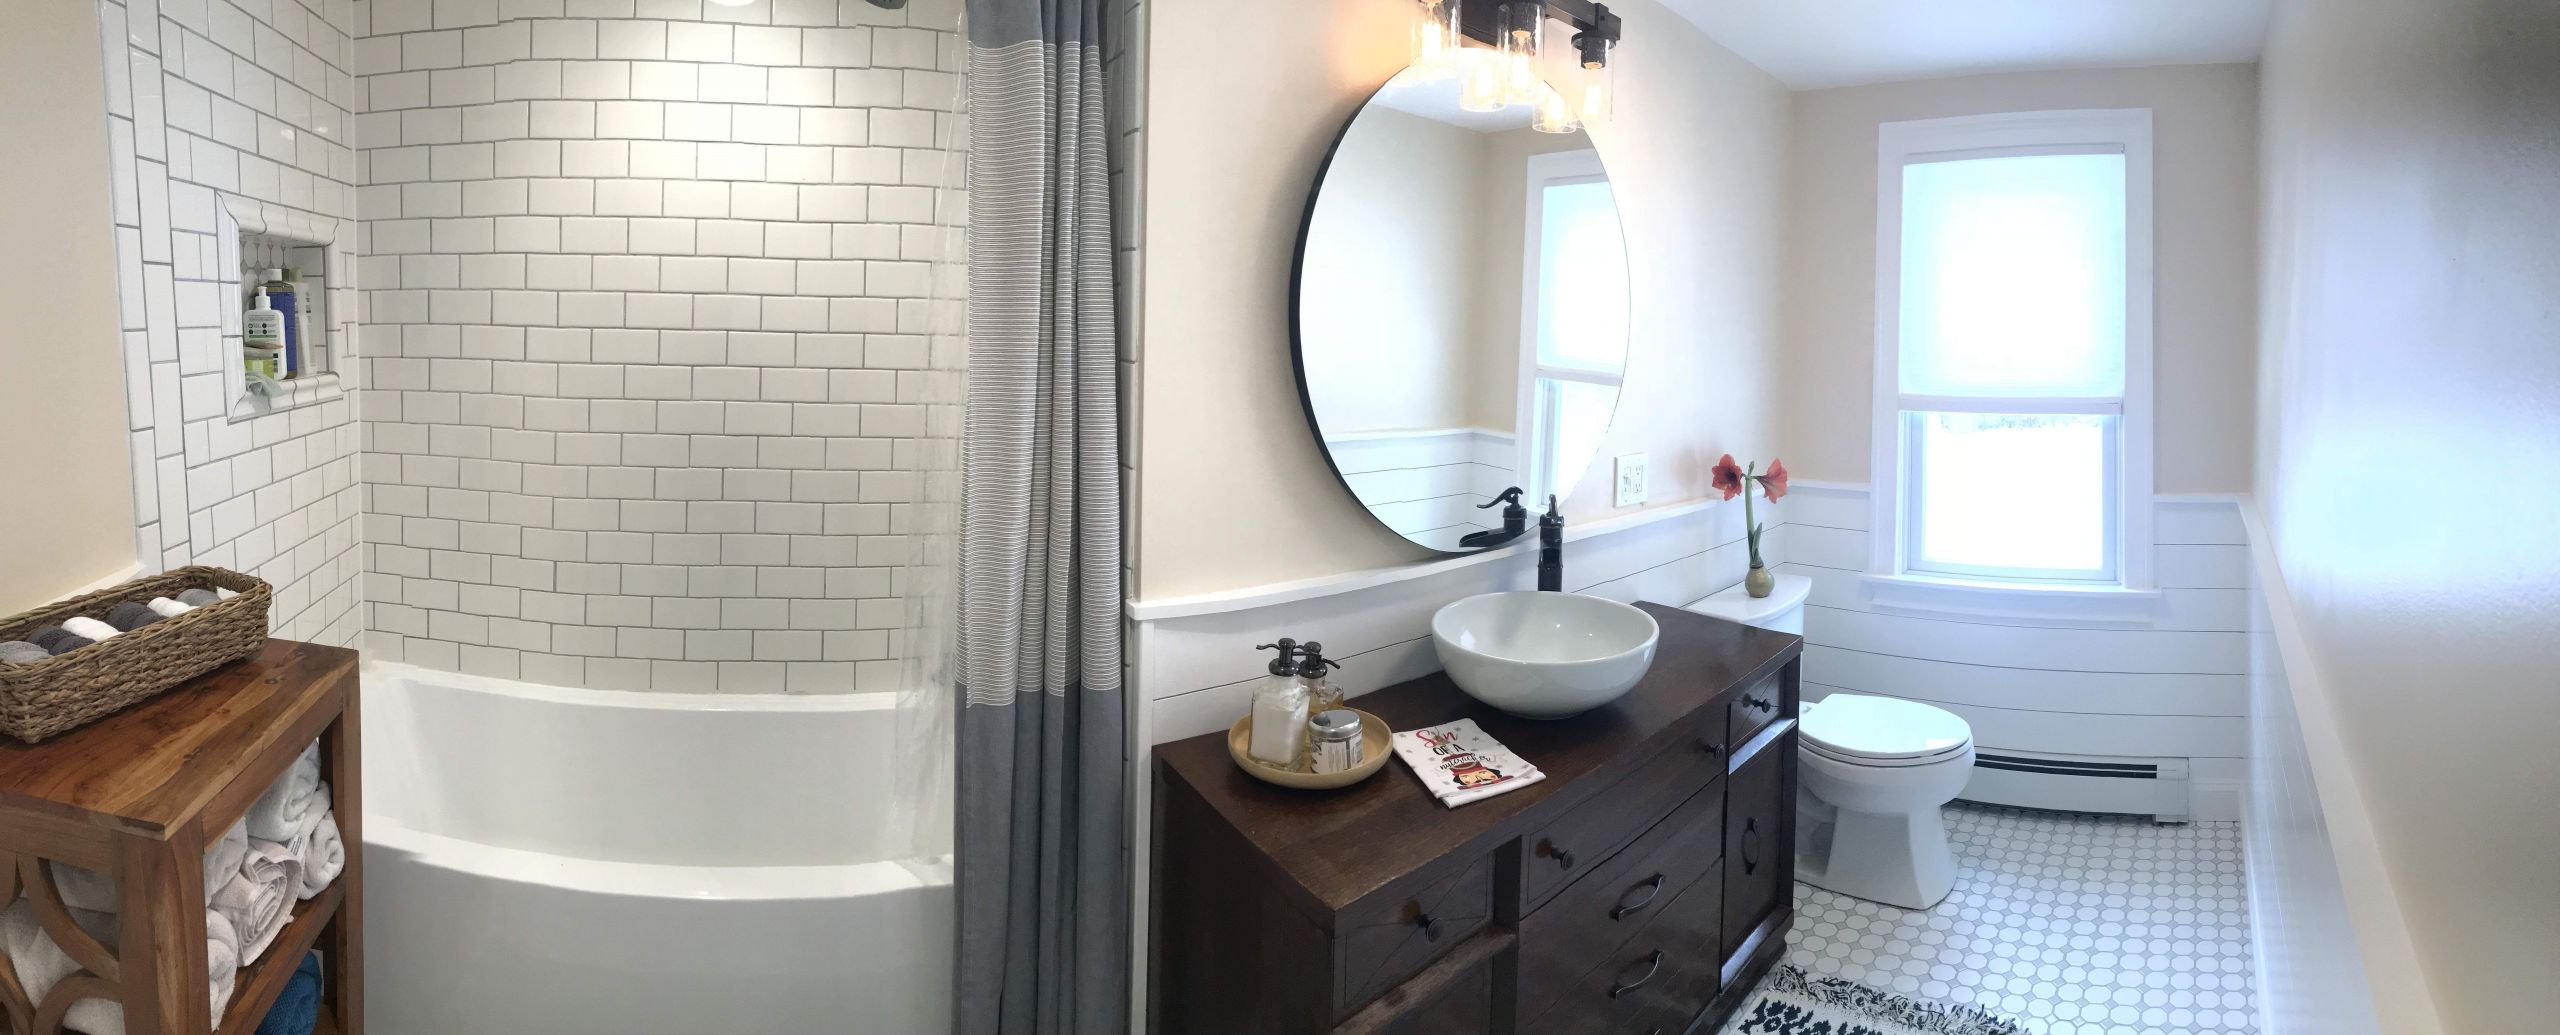 Complete Bathroom Remodel Cost
 Our "one month" turned three months DIY plete bathroom